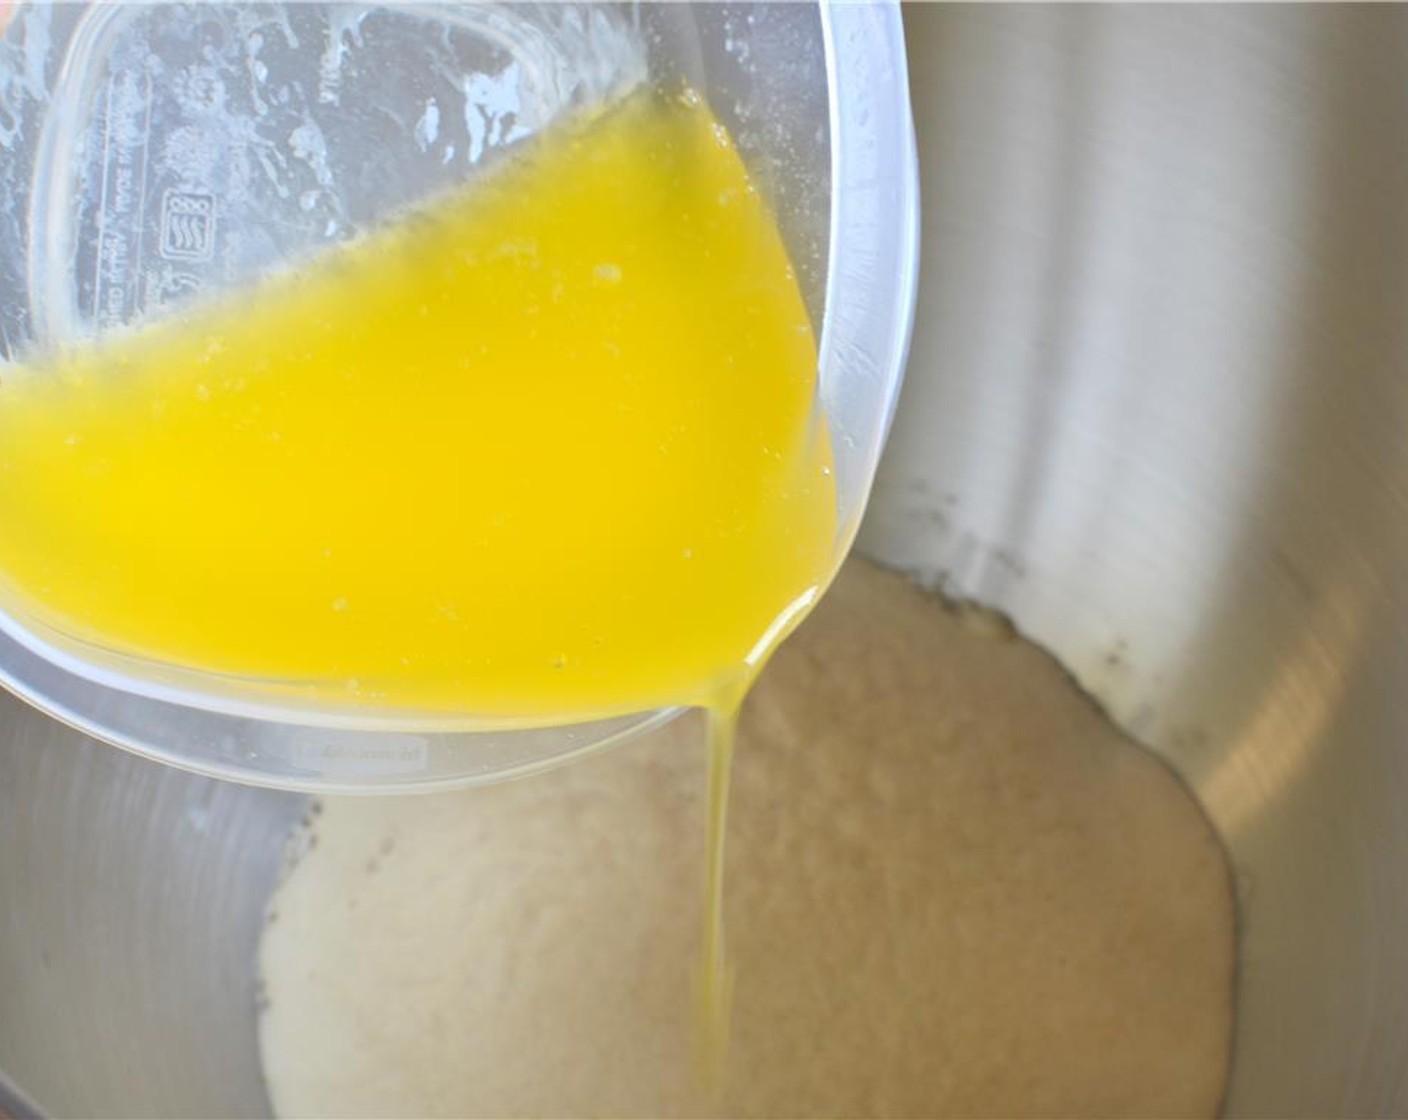 step 2 Once the yeast mix is bubbly, pour in the Butter (1/3 cup).